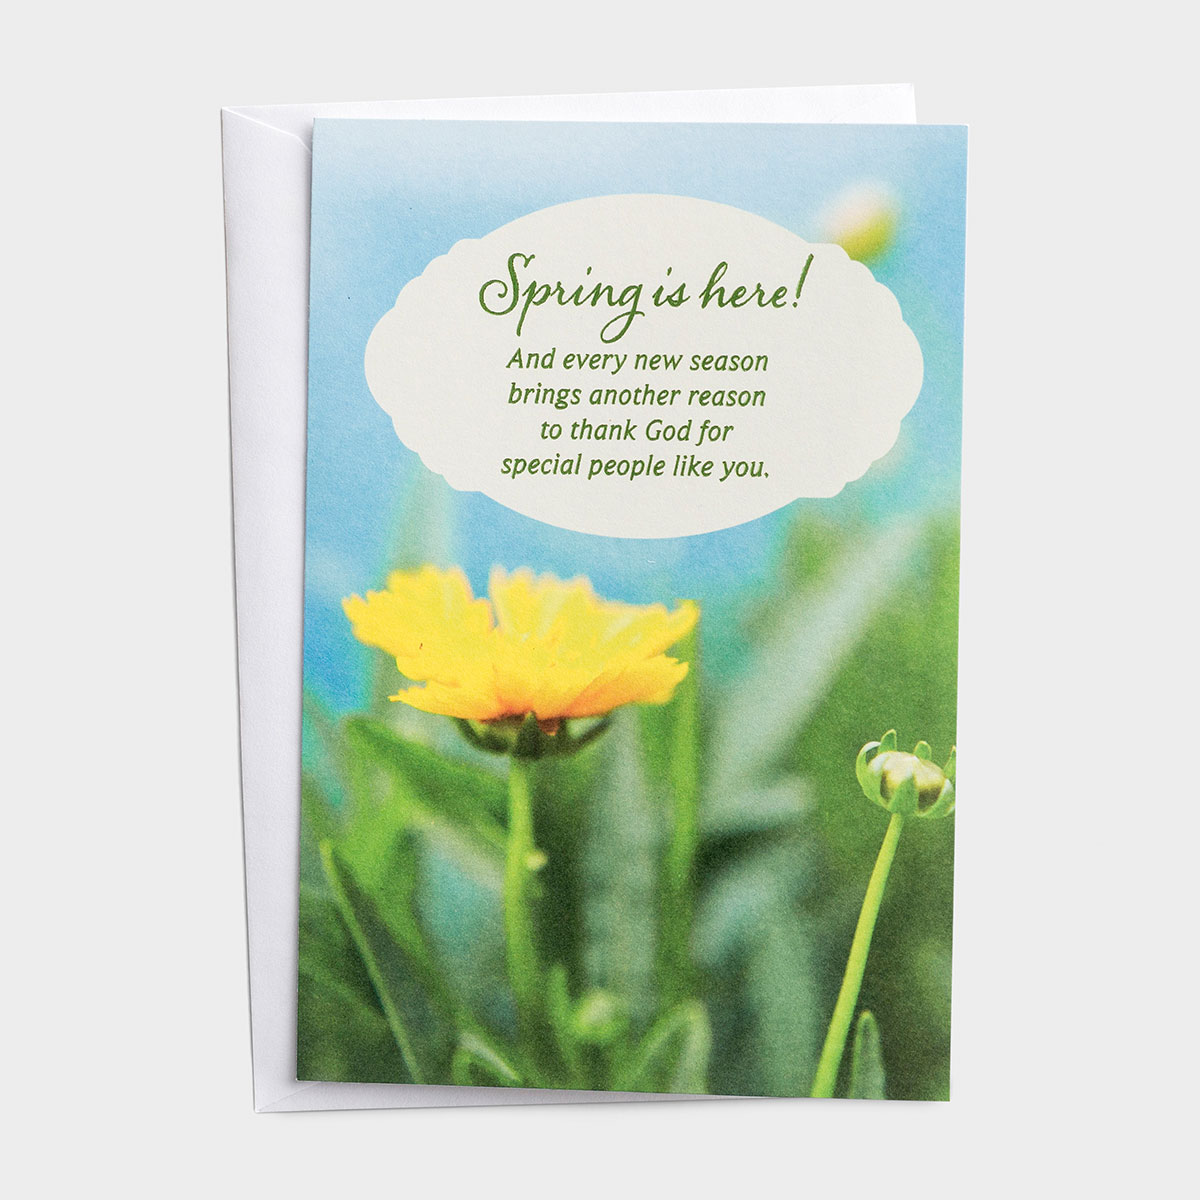 DaySpring offers Inspirational Seasonal Note Cards, including Easter Note Cards with Beautiful Designs!